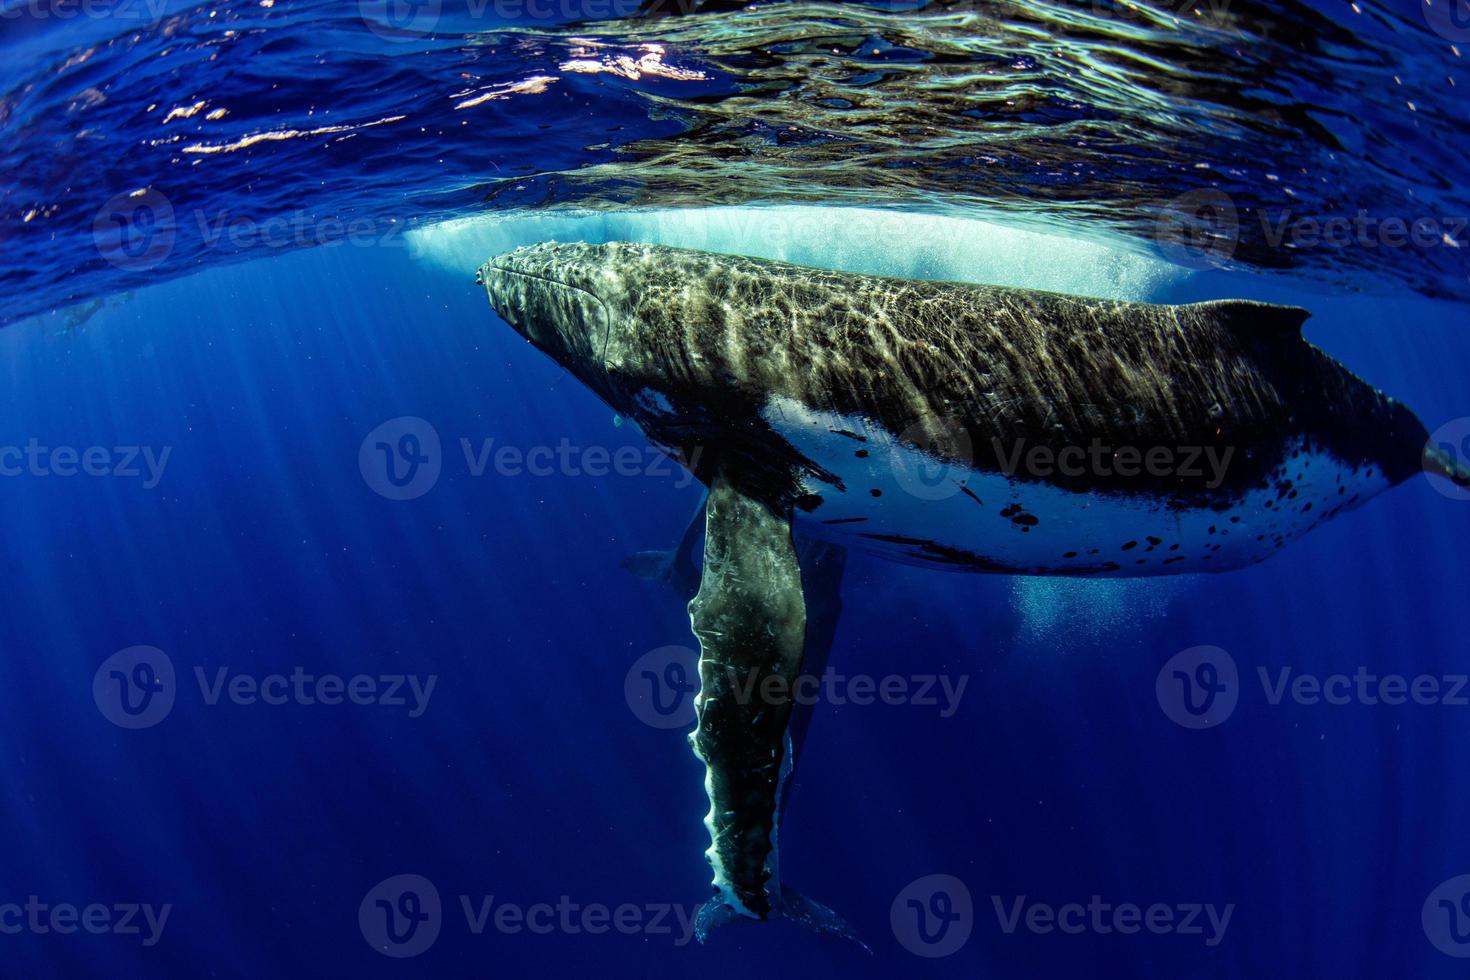 diving with Humpback whale underwater in Moorea French Polynesia photo